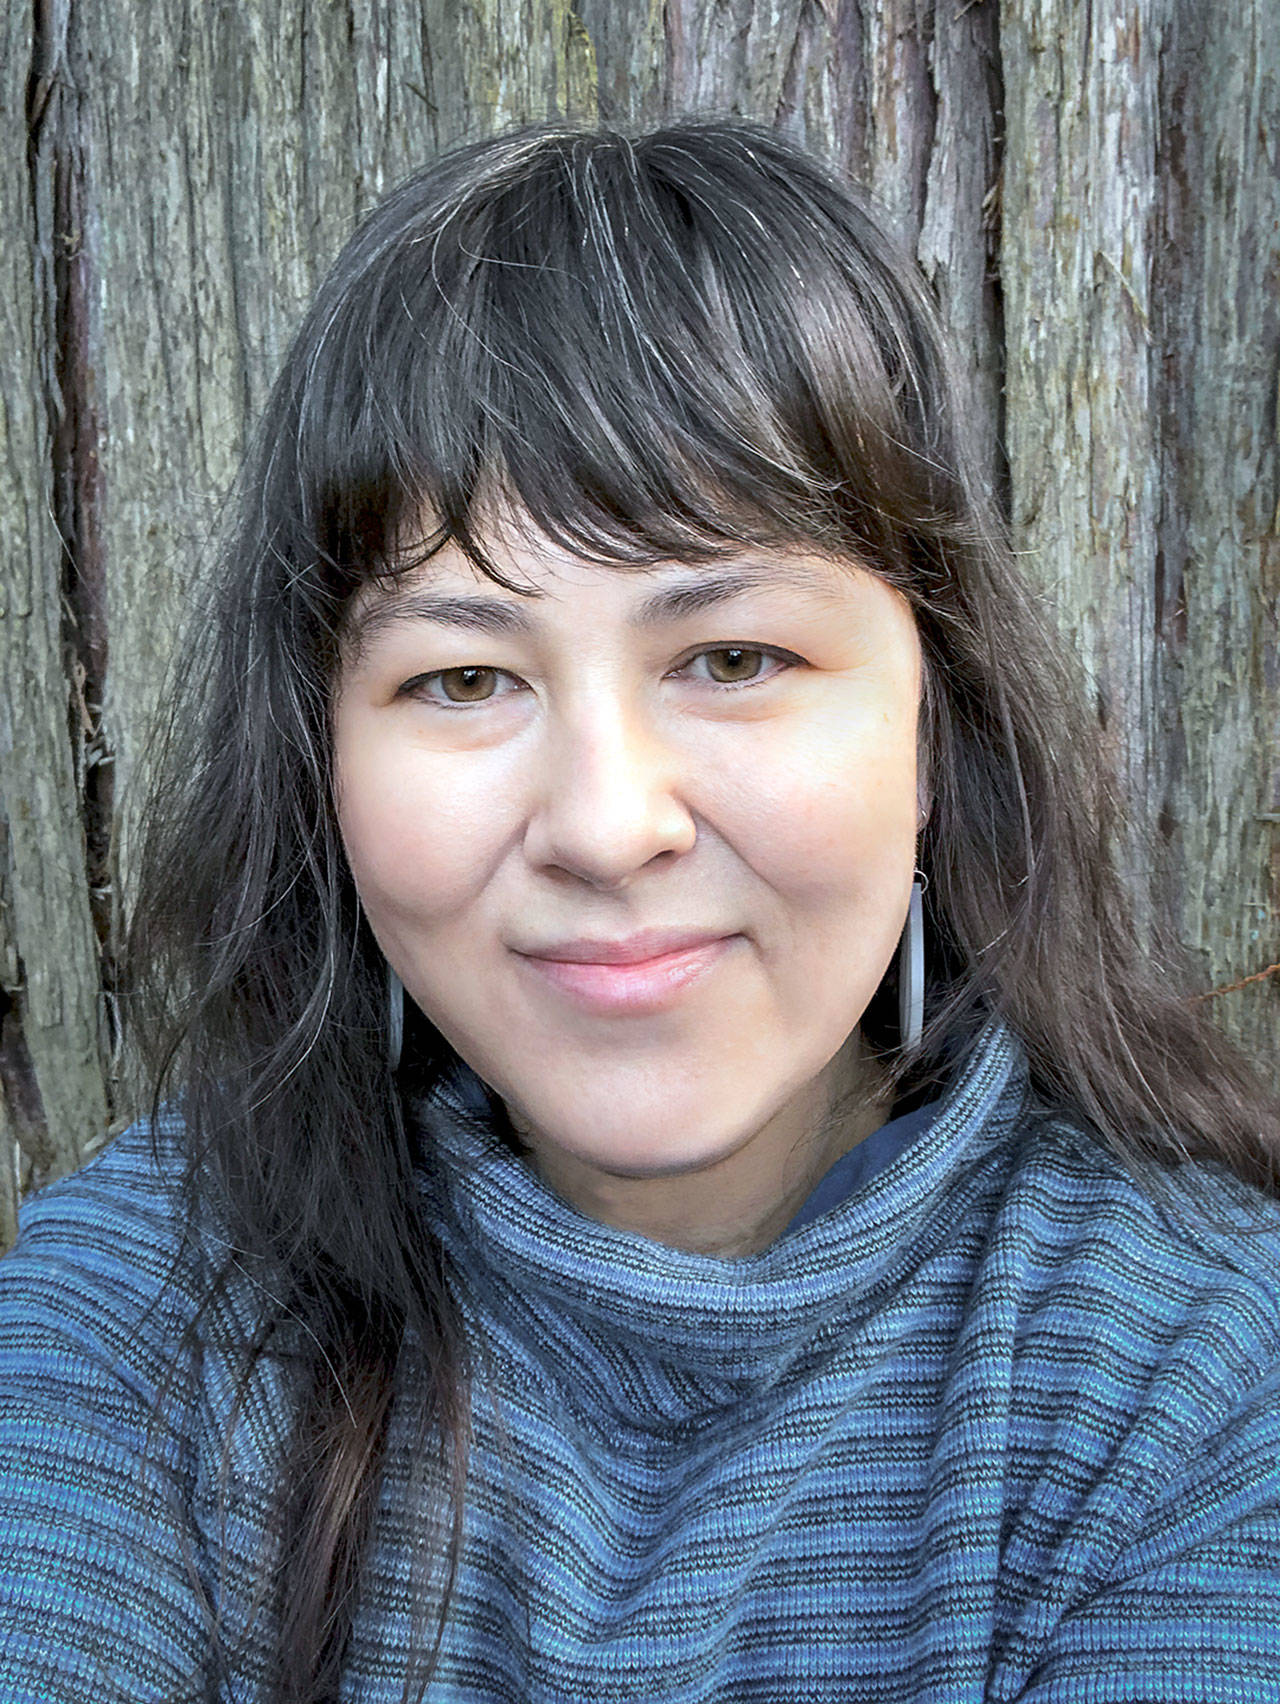 Anne Liu Kellor of Seattle is author of “Heart Radical” on She Writes Press.